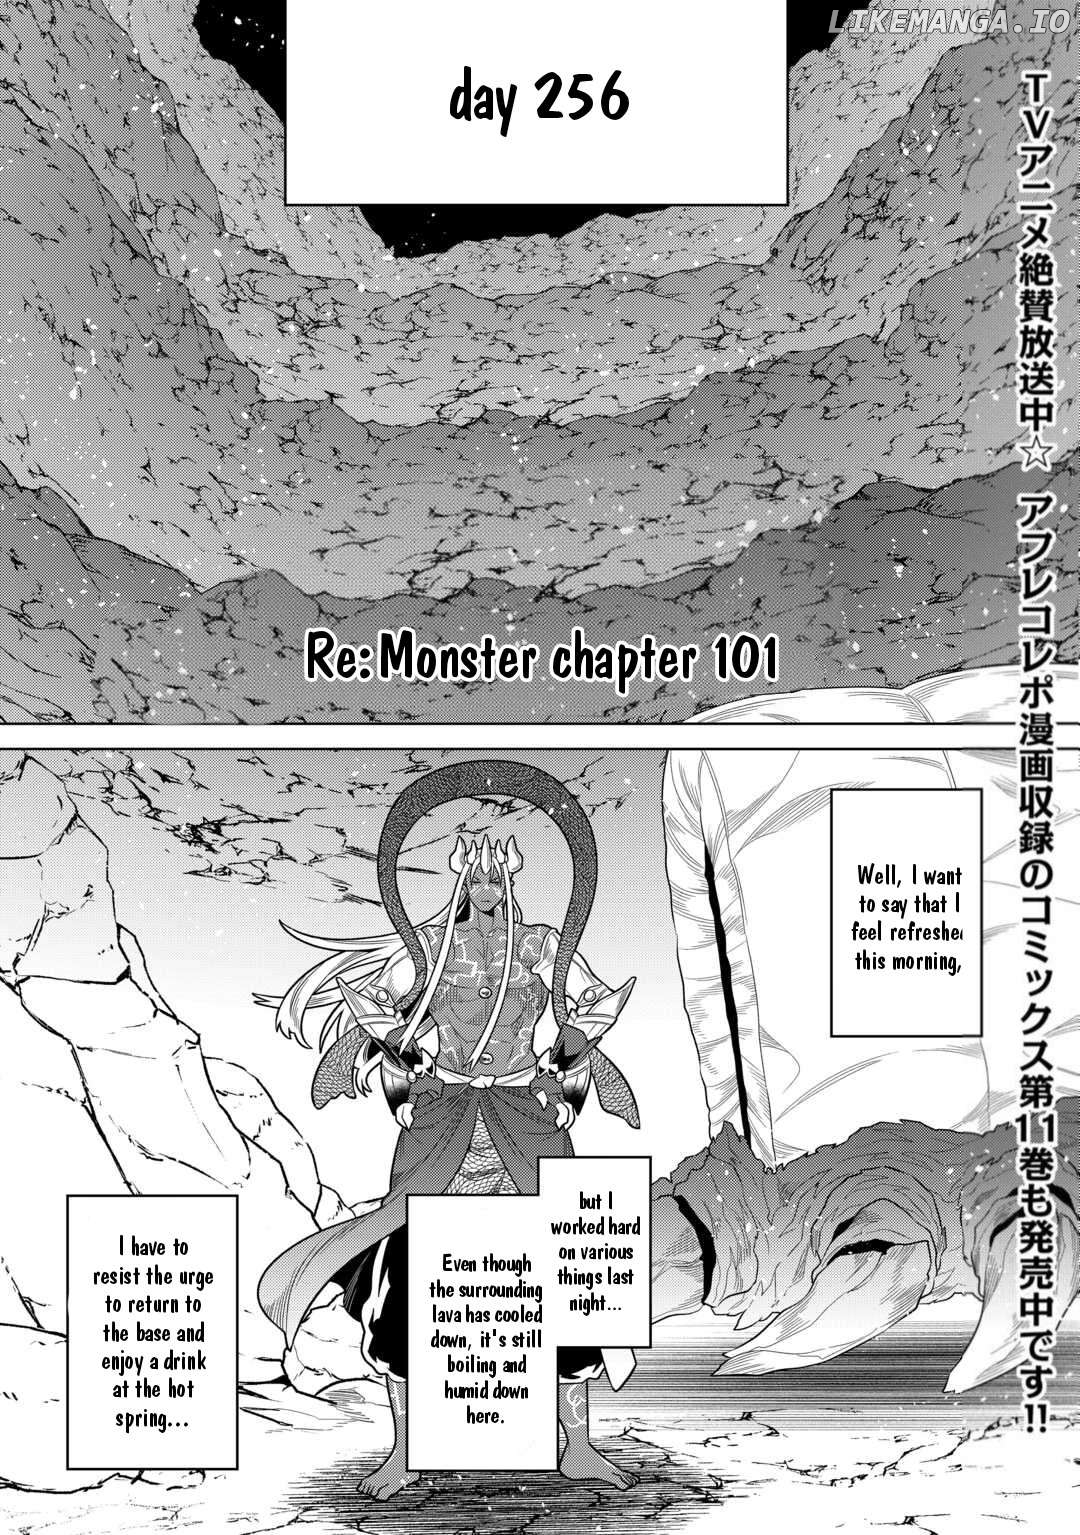 Re:Monster Chapter 101 - page 2